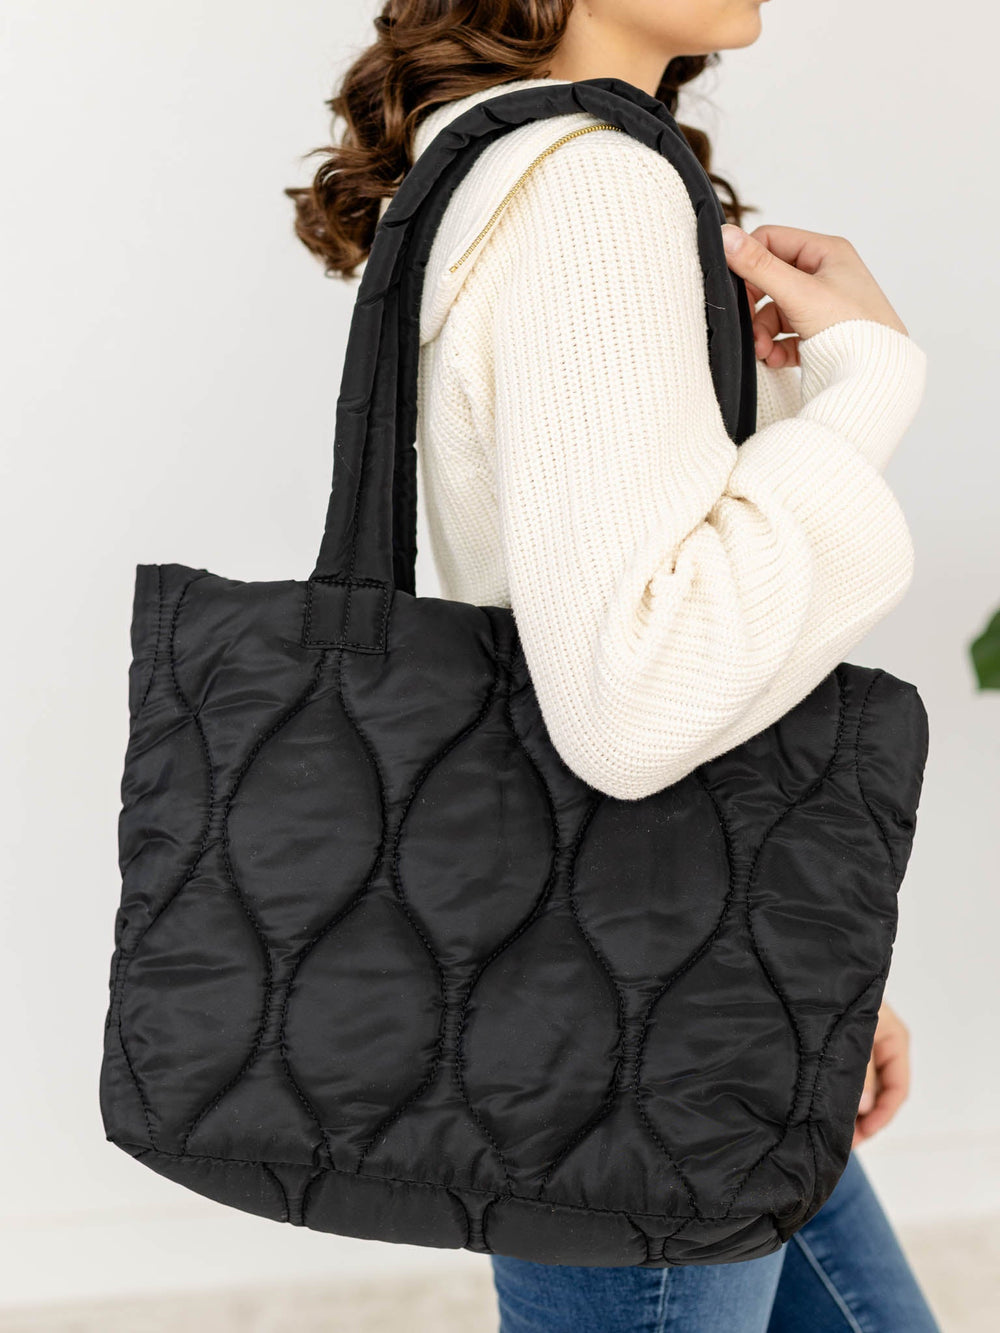 Quilted Square Tote BagHandbags